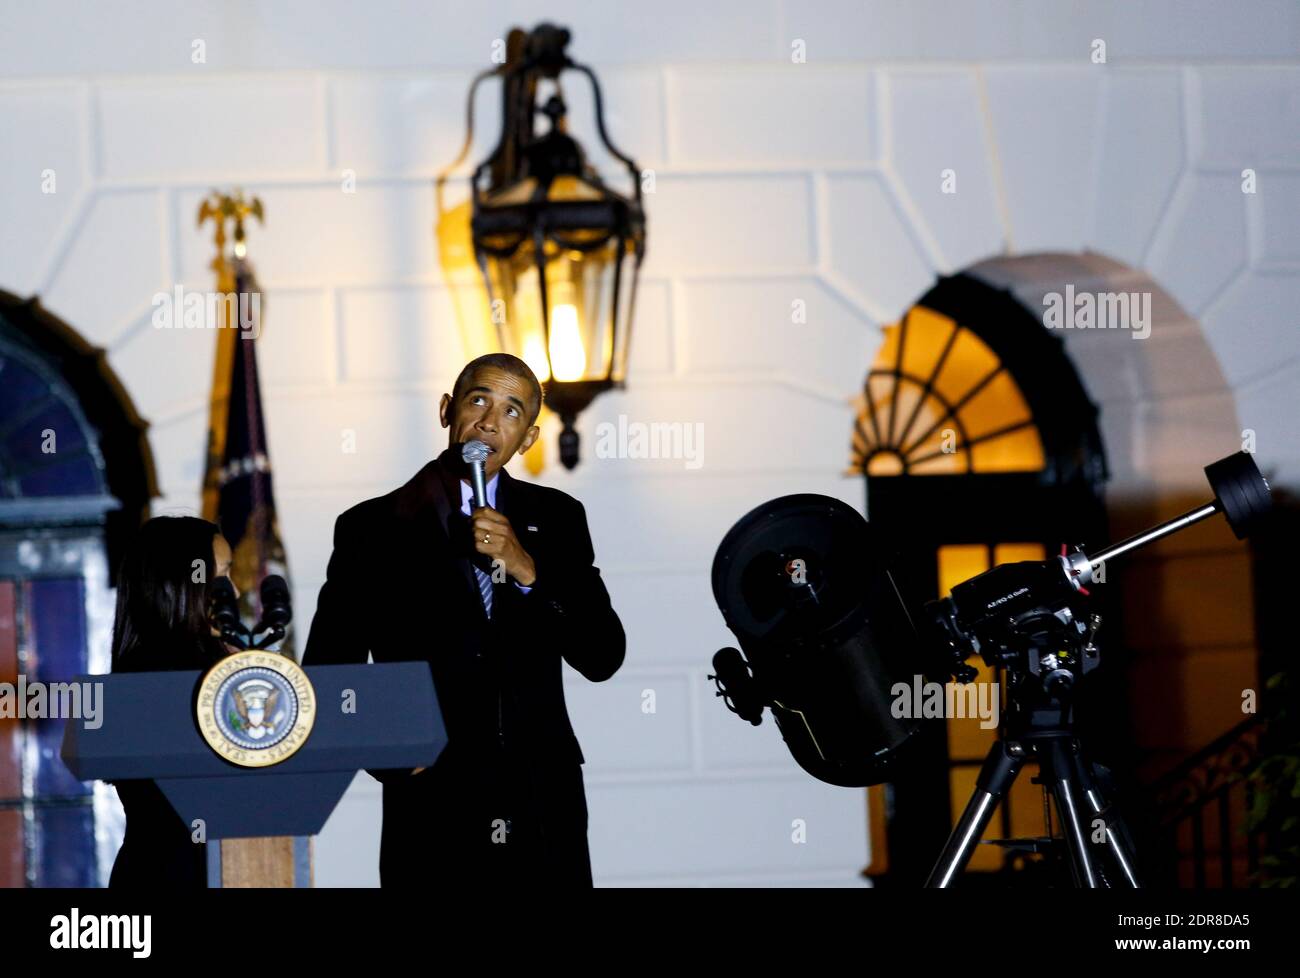 US President Barack Obama gets ready to look through a telescope with the help of Agatha Sofia Alvarez-Bareiro after delivering remarks at the second White House Astronomy Night attended by students, teachers, scientists, astronauts and others in the South Lawn of the White House in Washington, DC, USA, on october 19, 2015. Photo by Aude Guerrucci/Pool/ABACAPRESS.COM Stock Photo